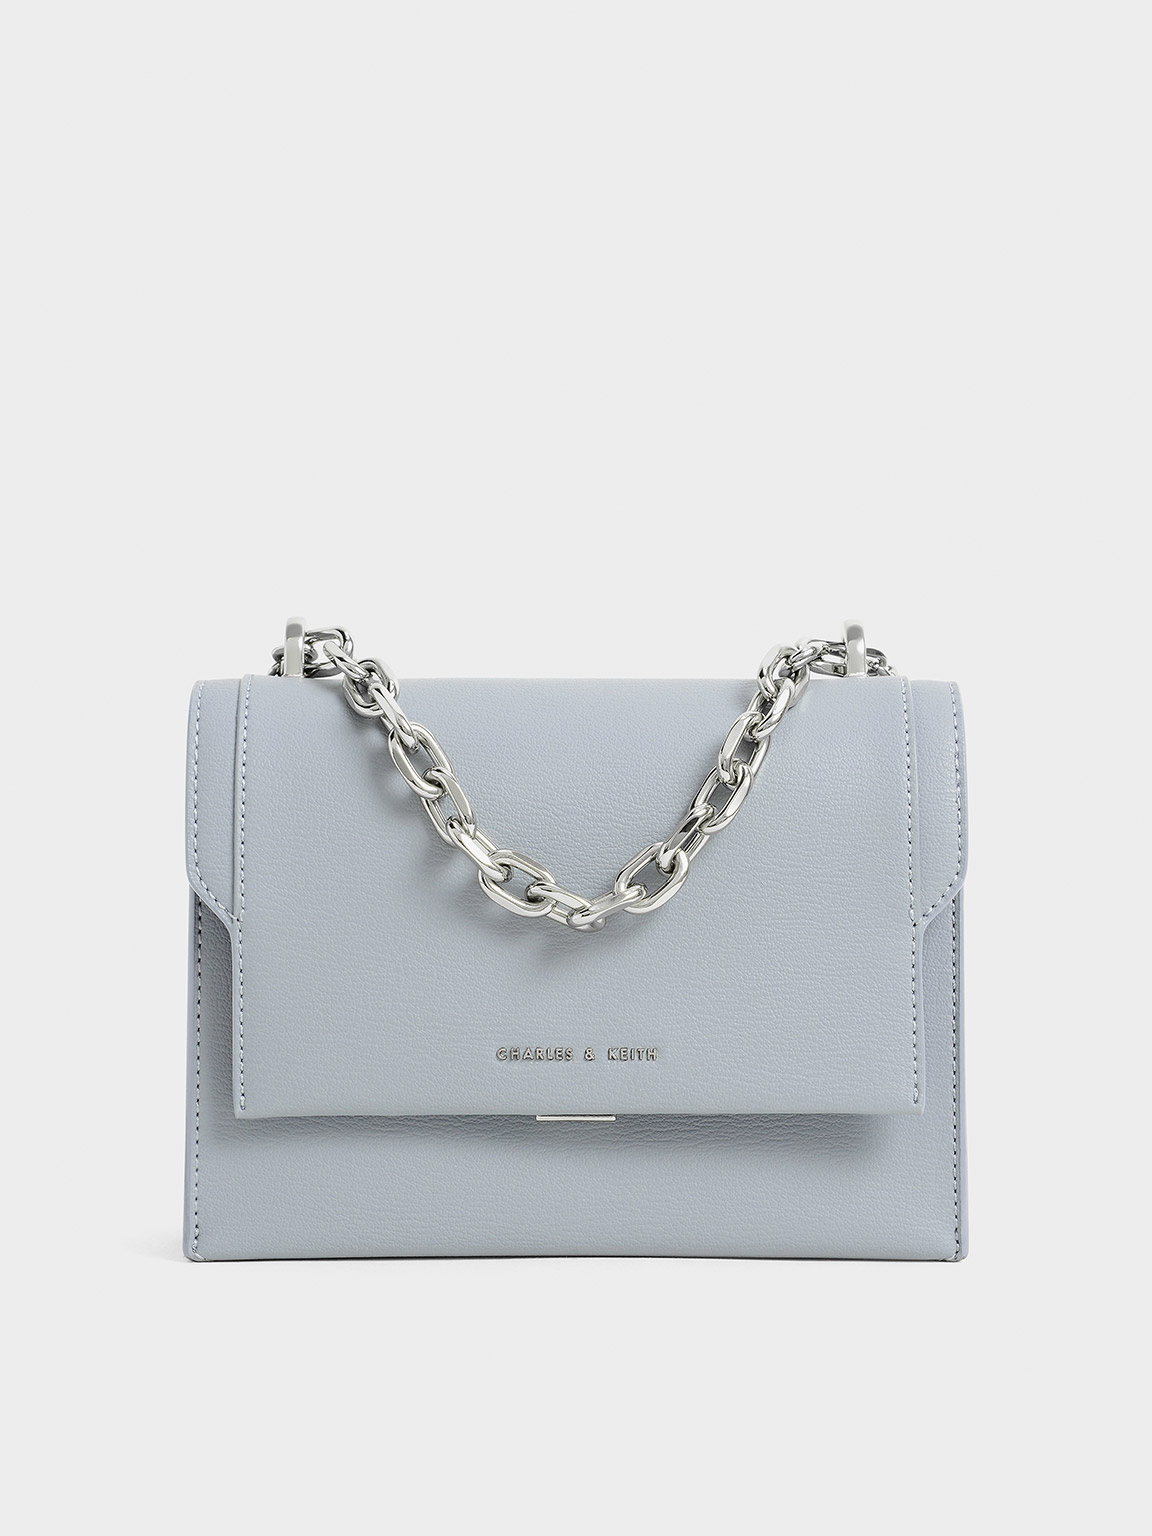 CHARLES & KEITH Sling Bag, The best prices online in Malaysia